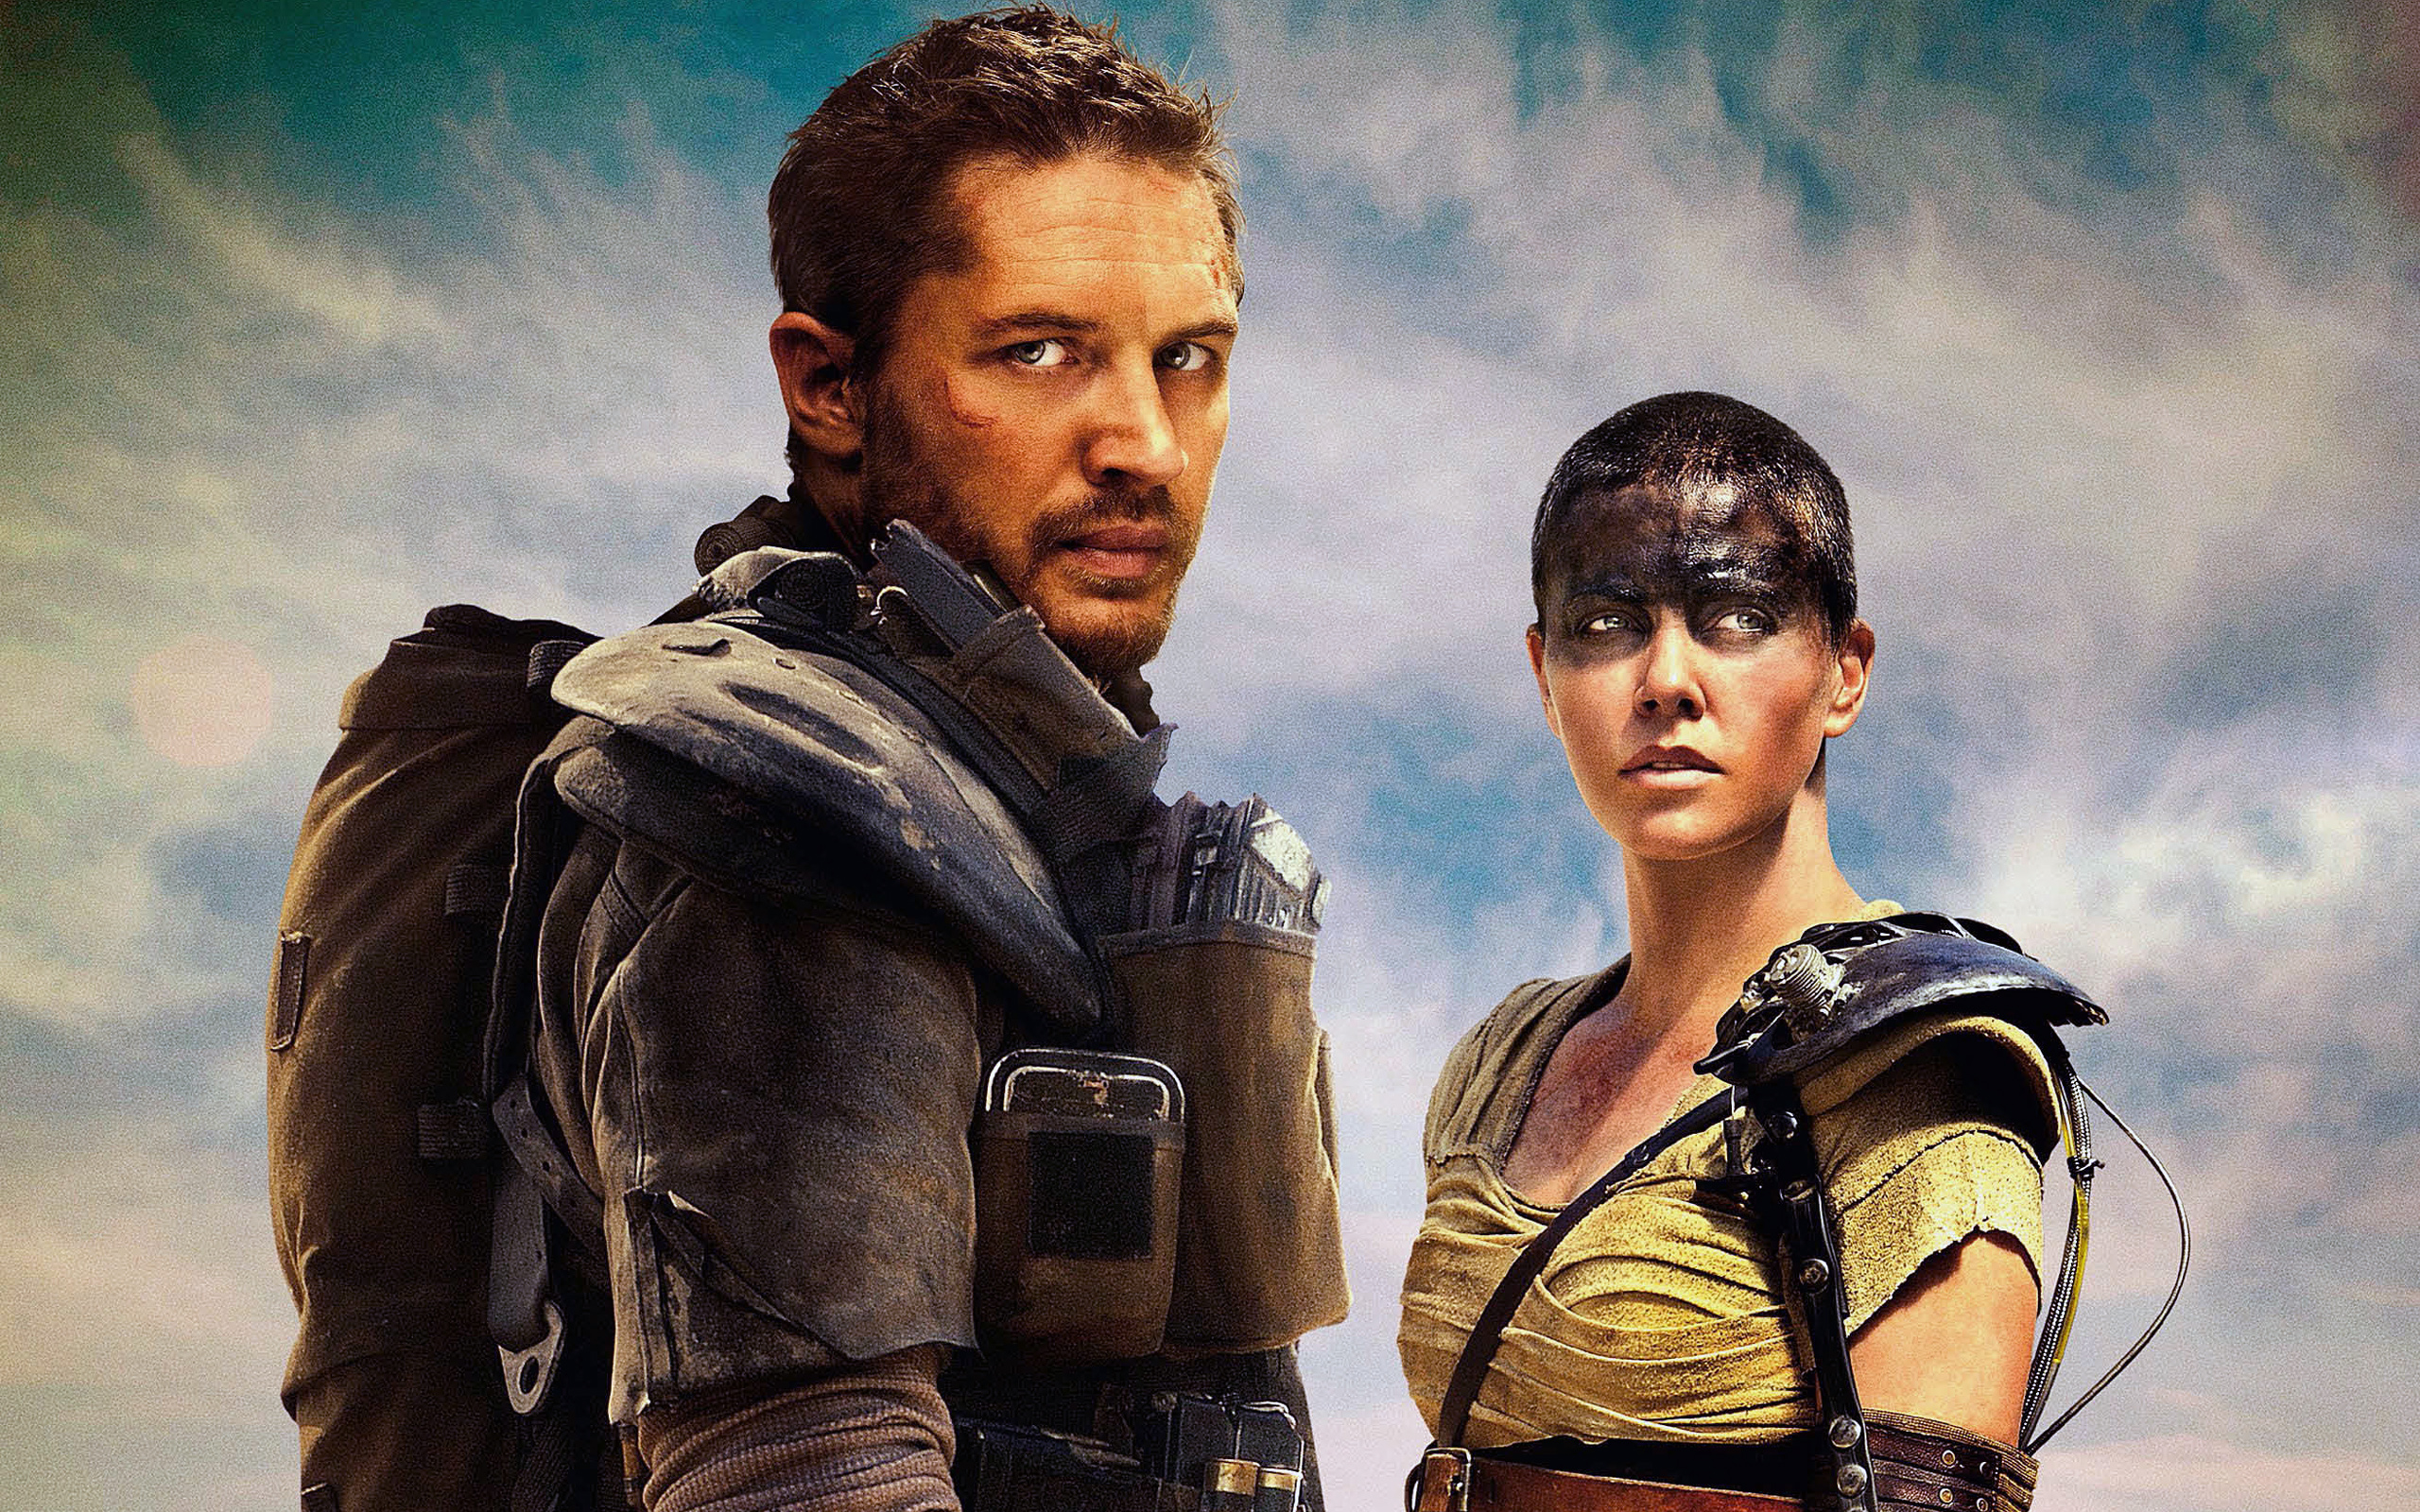 MAD MAX: FURY ROAD is a Maddened Masterpiece